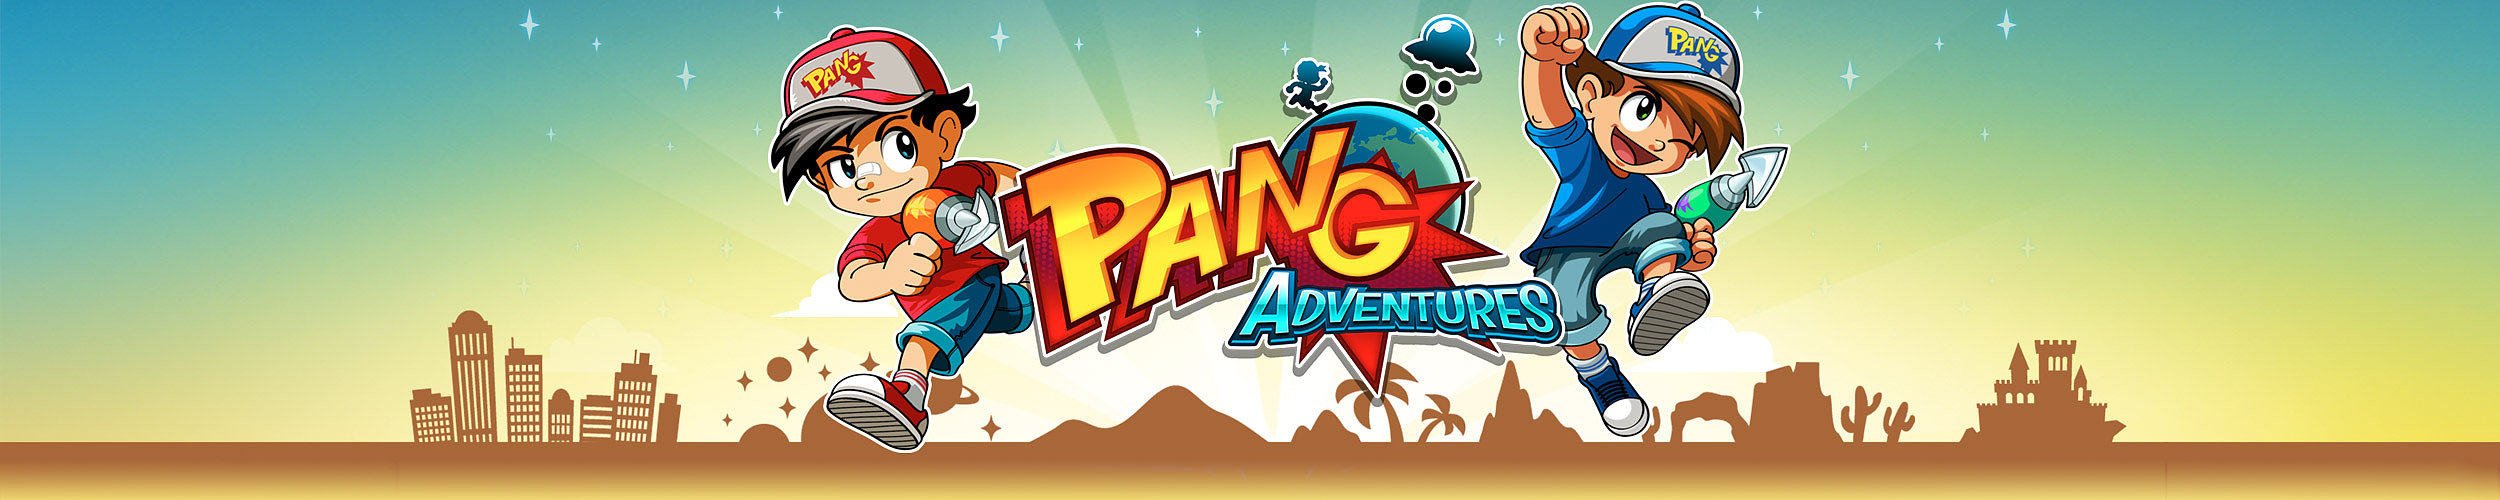 Pang Adventures is now available!